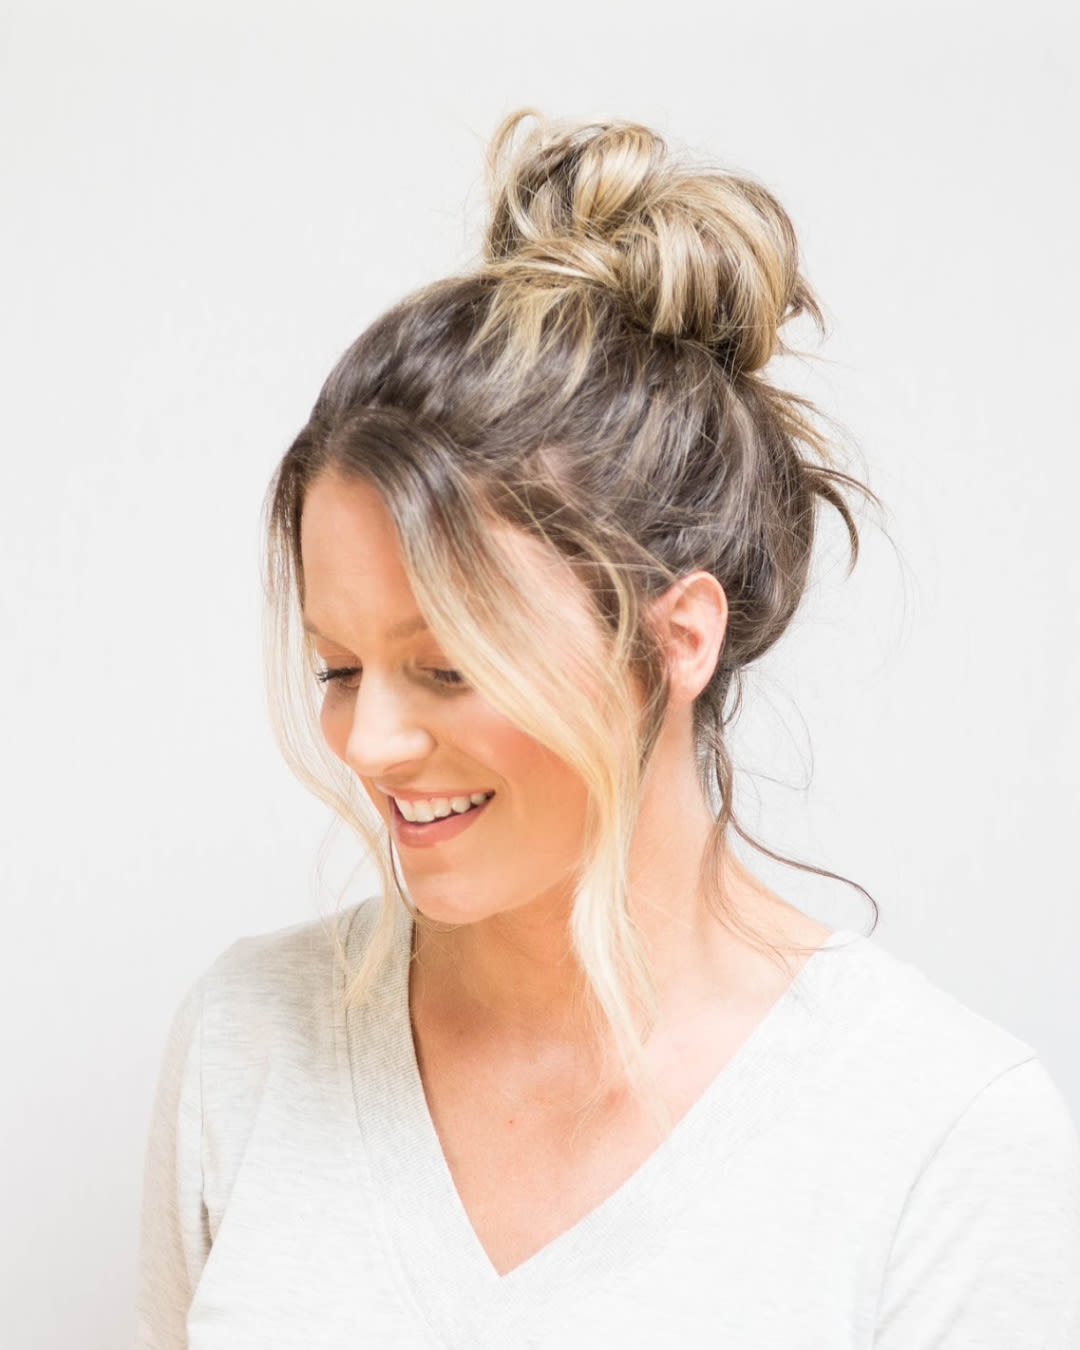 14 Amazing Front Bun Hairdo for The Holidays